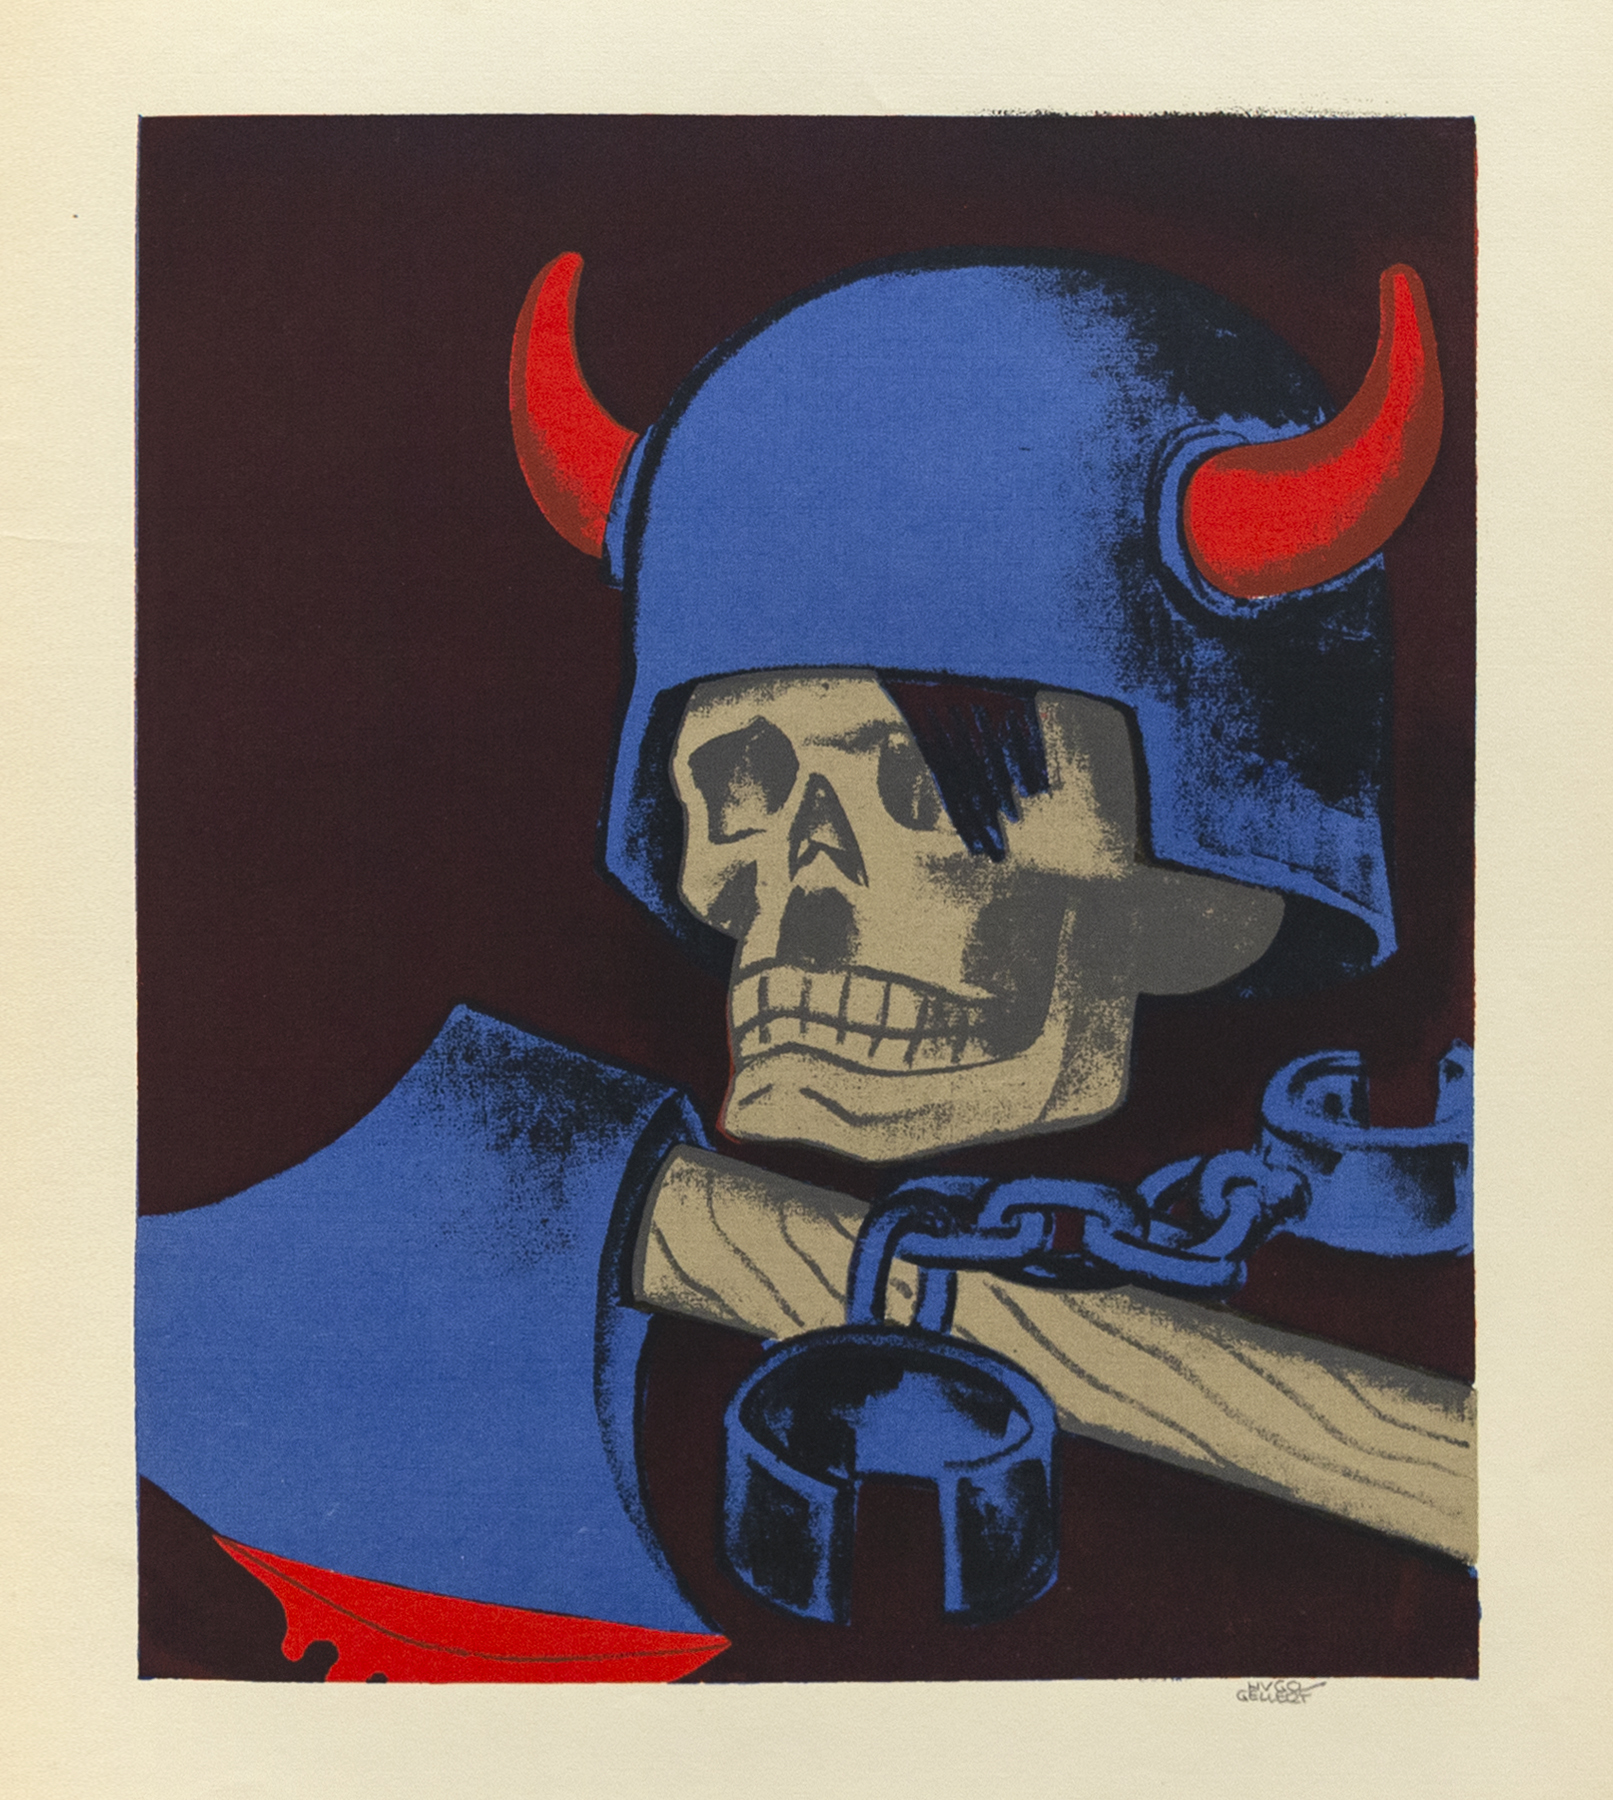 Religion of Darkness, 1943, Silkscreen, 15 x 13 inches (38.1 x 33 cm), Edition of 54